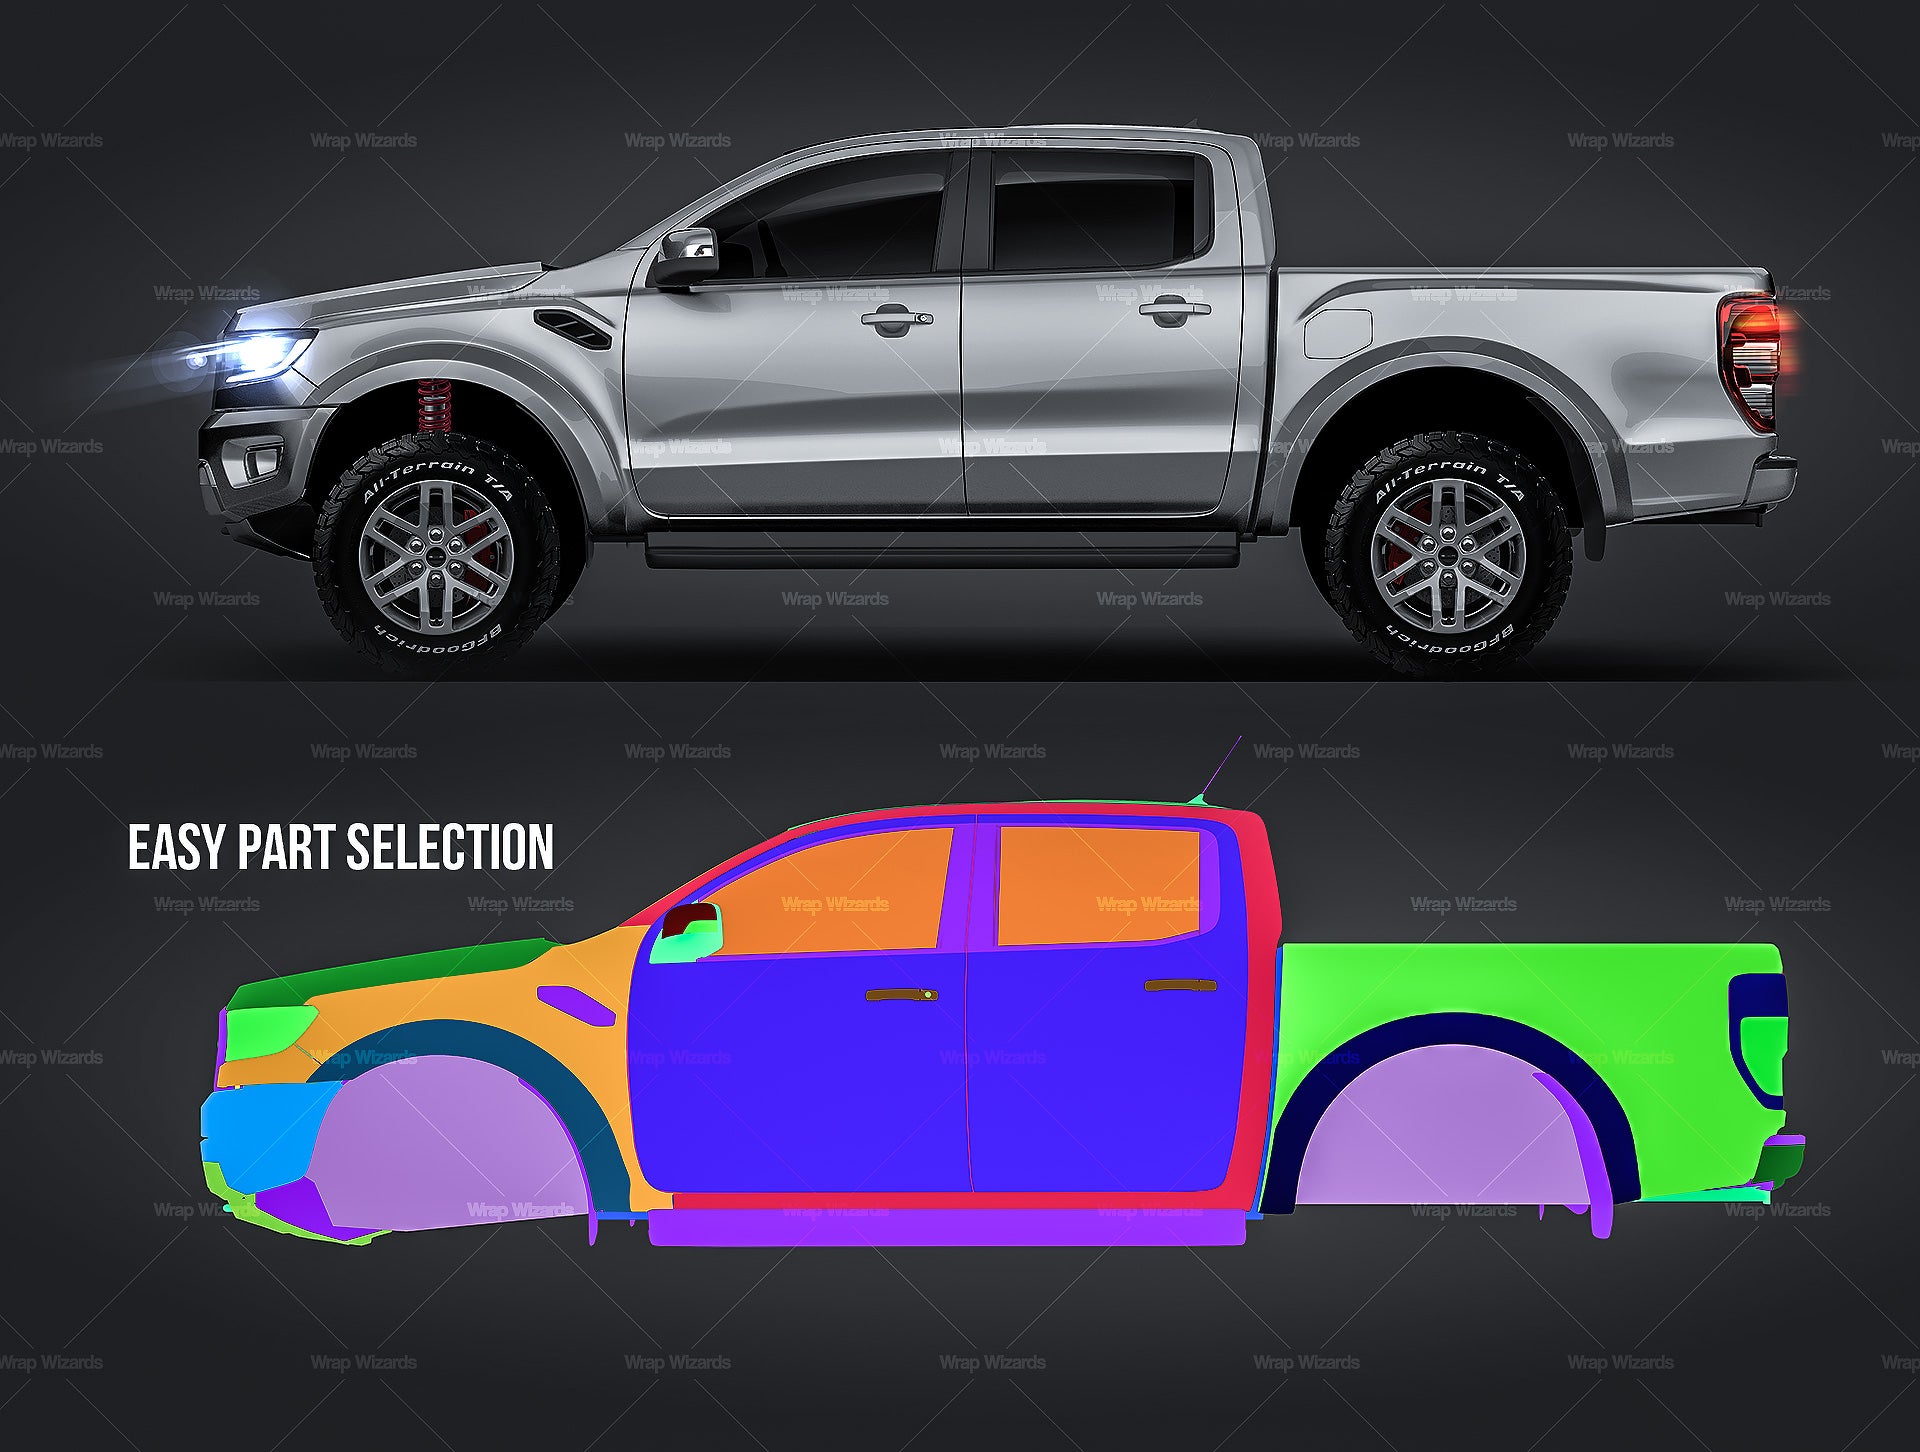 Ford Ranger F-150 Raptor 2018 glossy finish - all sides Car Mockup Template.psd